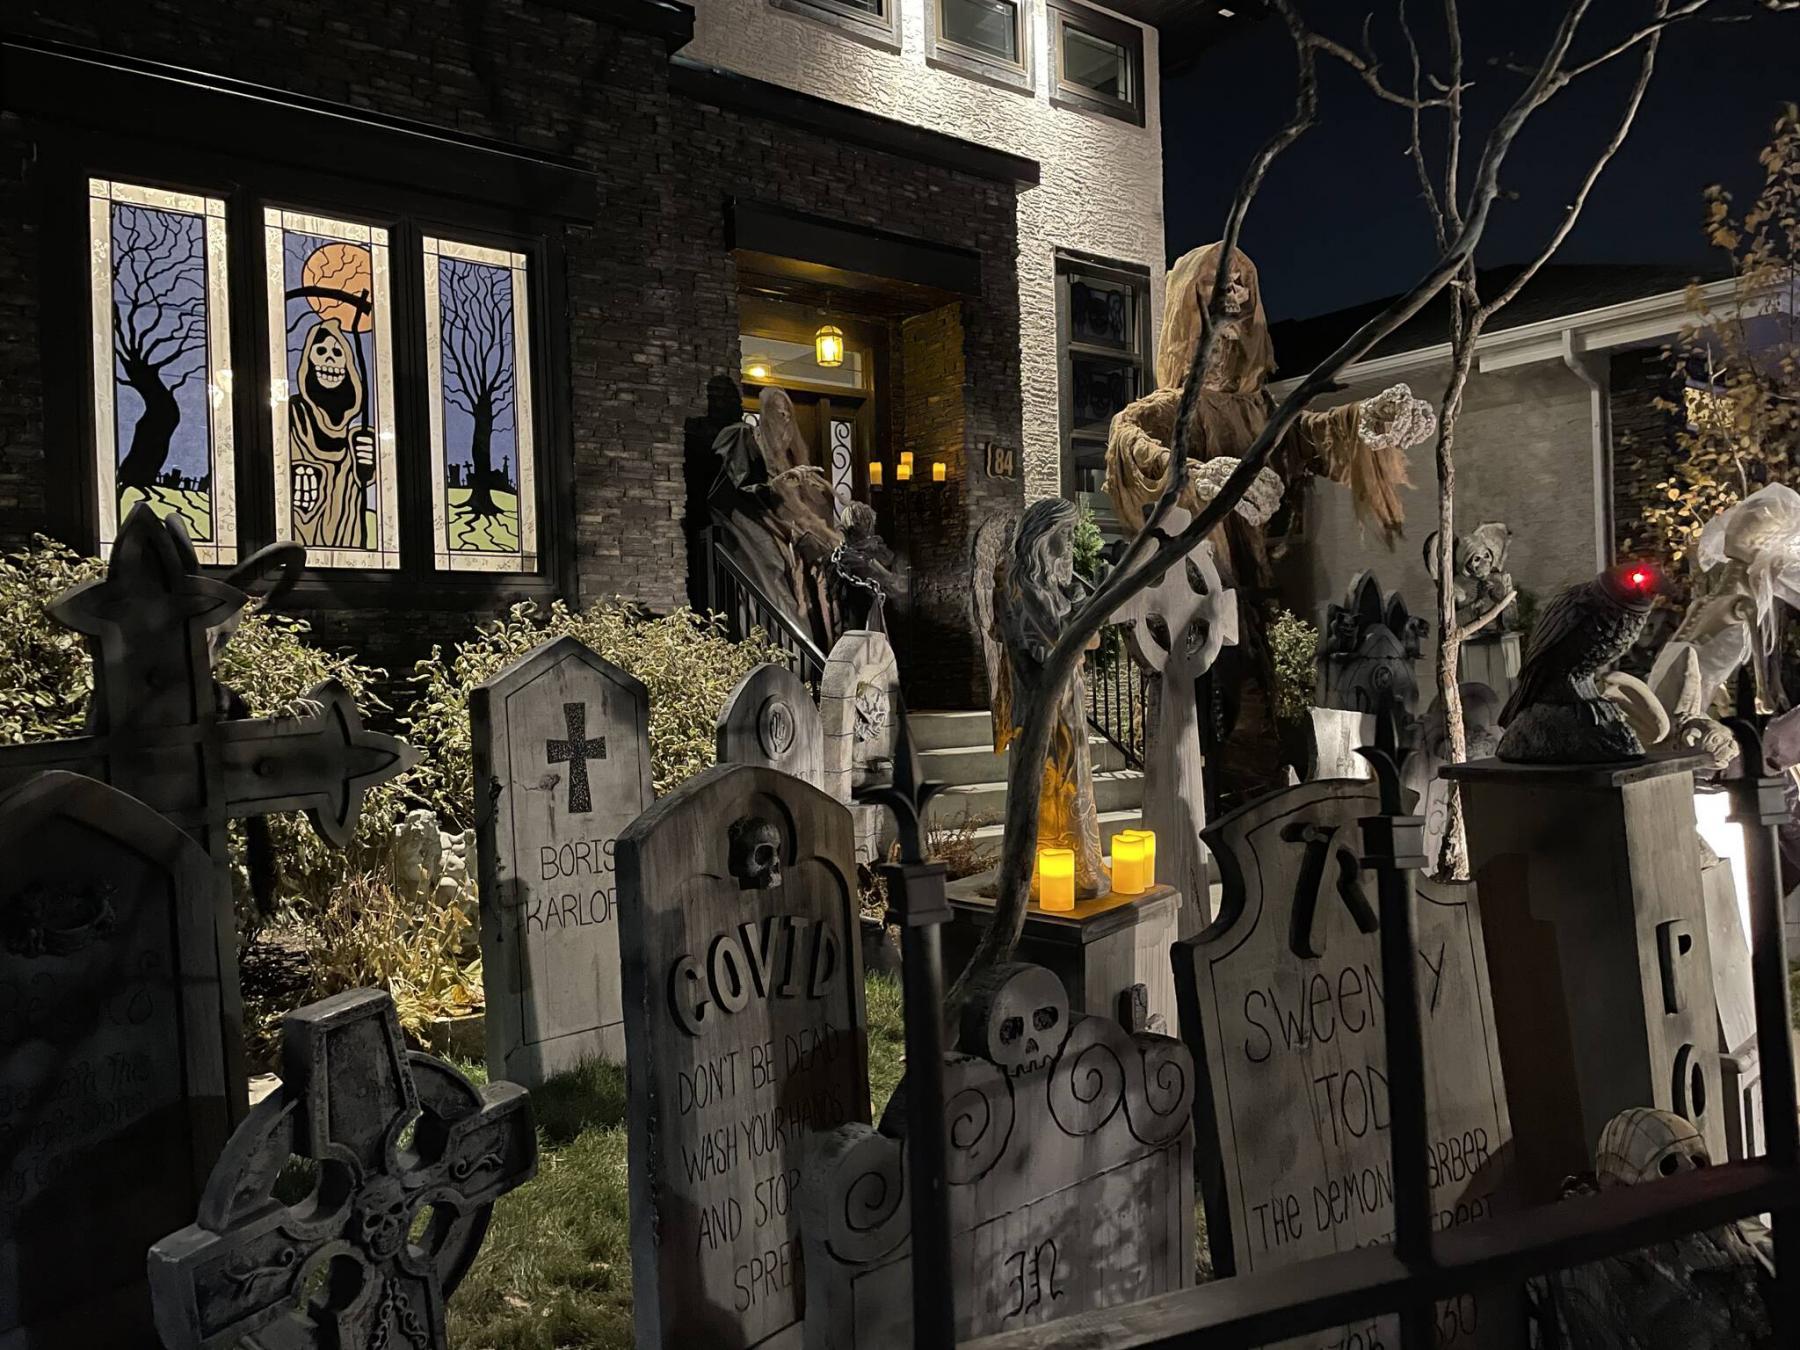  <p>Supplied</p>
                                <p>Winnipegger Shane Ungurian enjoys decorating his home and yard for Halloween.</p> 